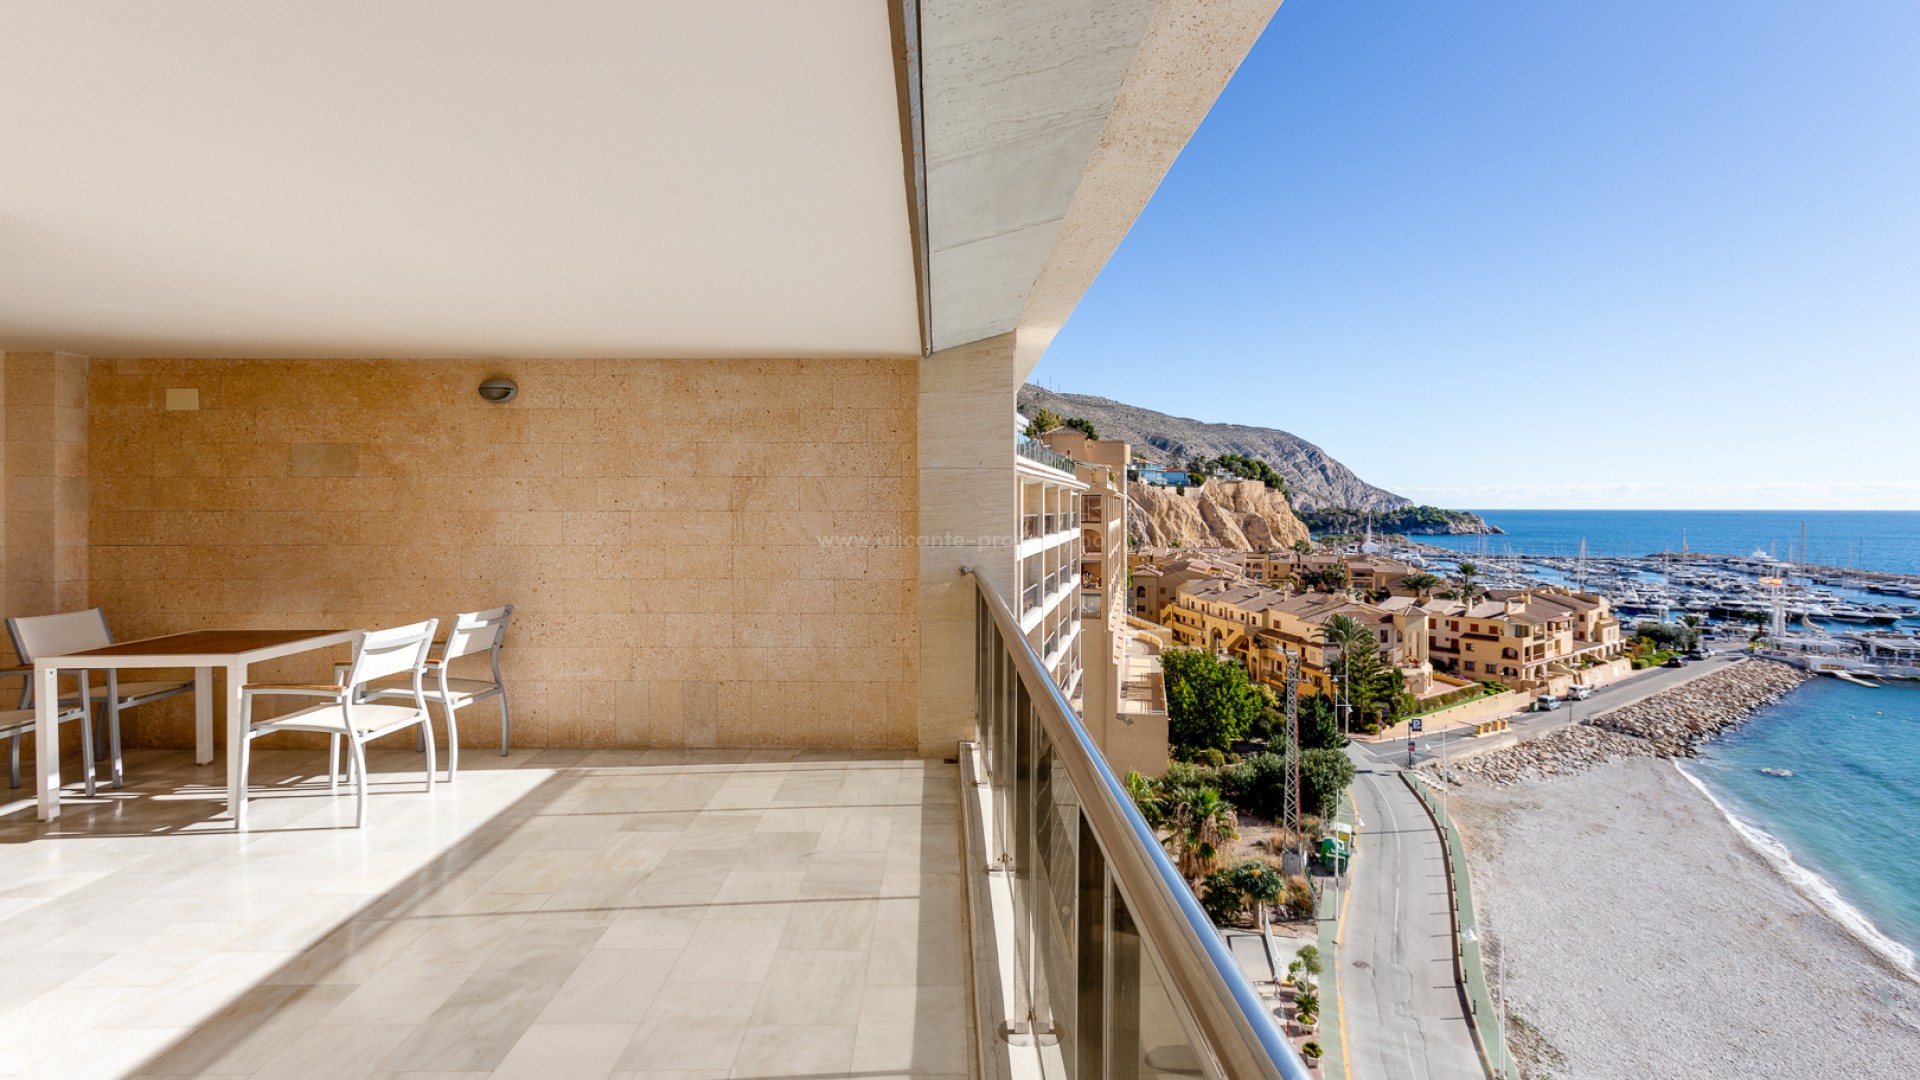 Apartments/flats by the beach in Altea, with fantastic views over the Mediterranean, first line apartments w/view, 82 m2, 2 bedrooms, 2 bathrooms